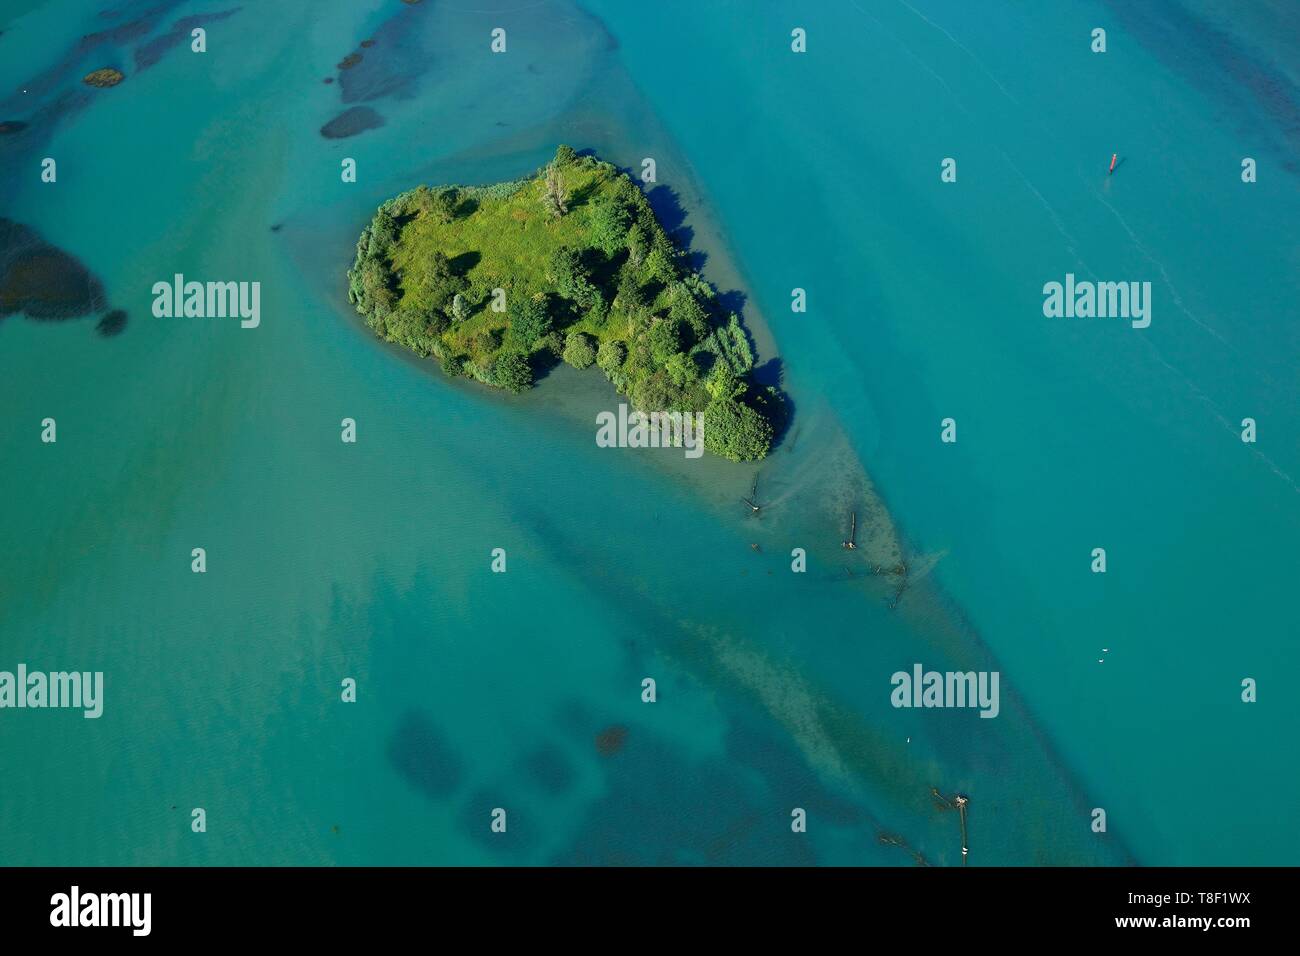 France, Ain, Massignieu de Rives, king's bed lake on the Rhone, bird island (aerial view) Stock Photo